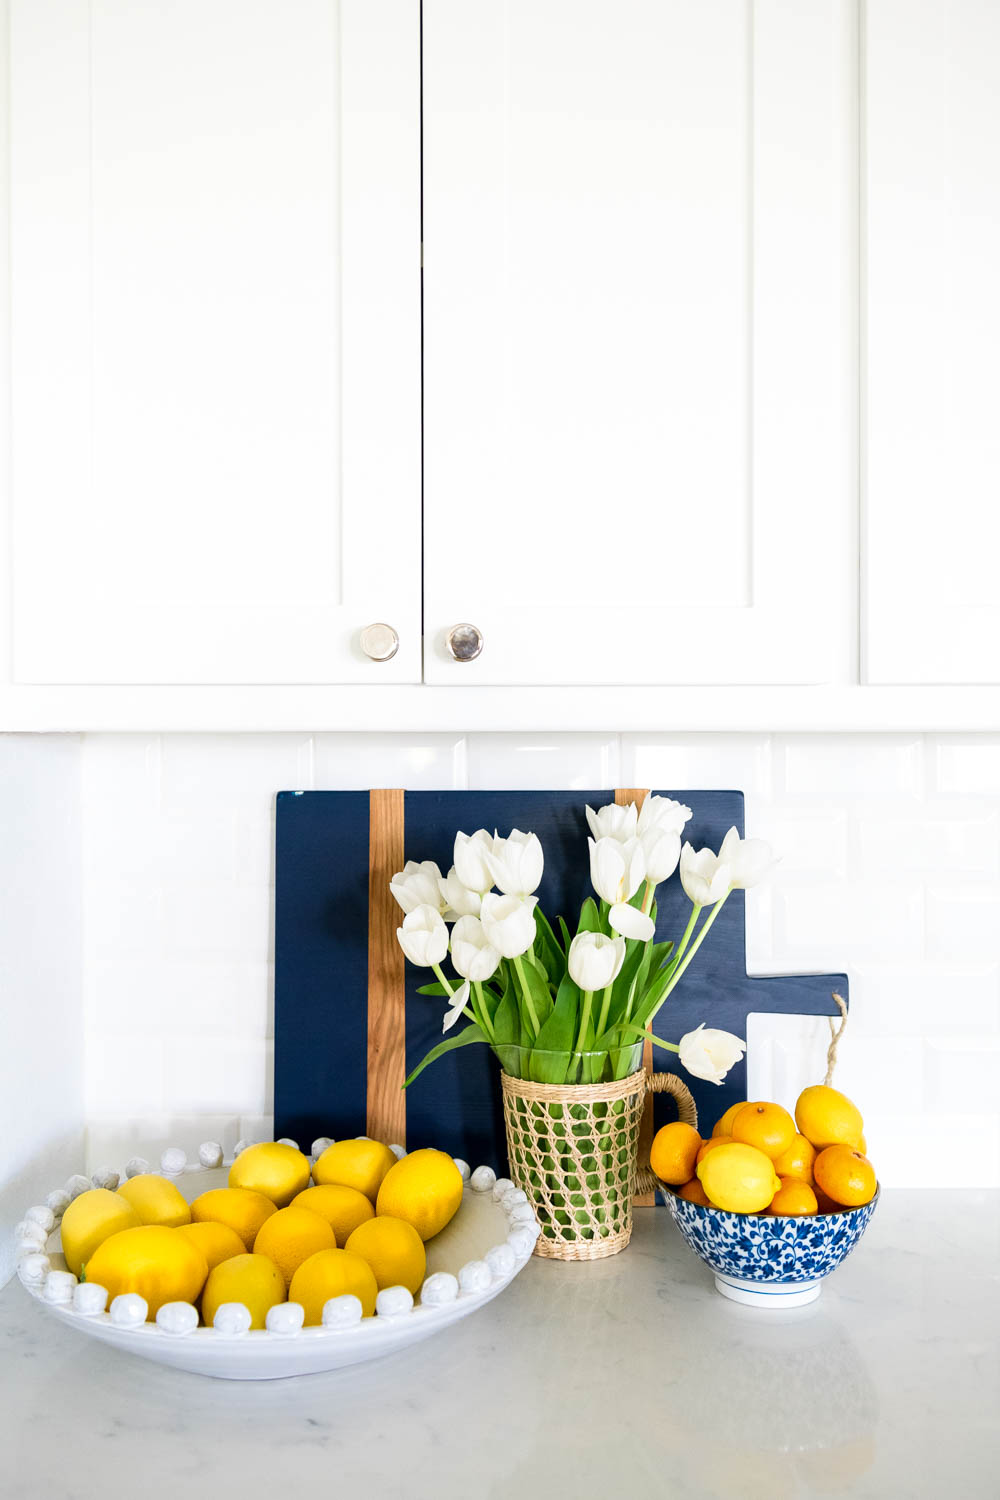 Add a bowl of fruit for color, blue and white bowl, tulips, cutting boards. #ABlissfulNest #kitchendecor #whitekitchen